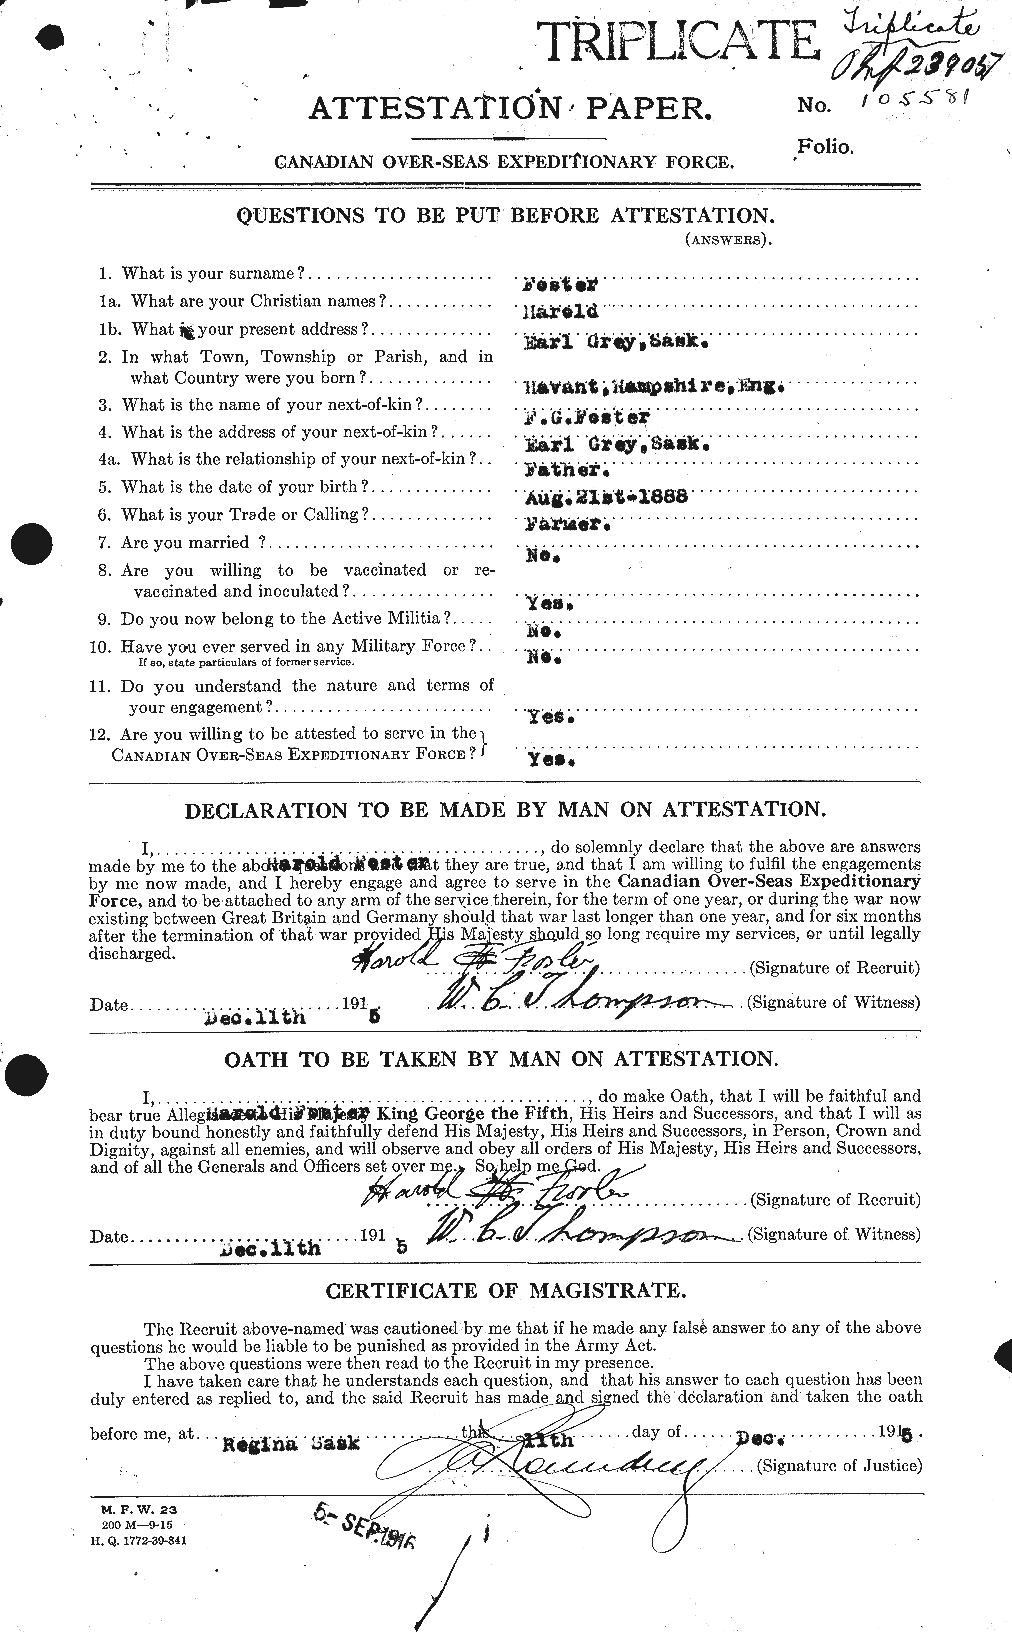 Personnel Records of the First World War - CEF 330724a